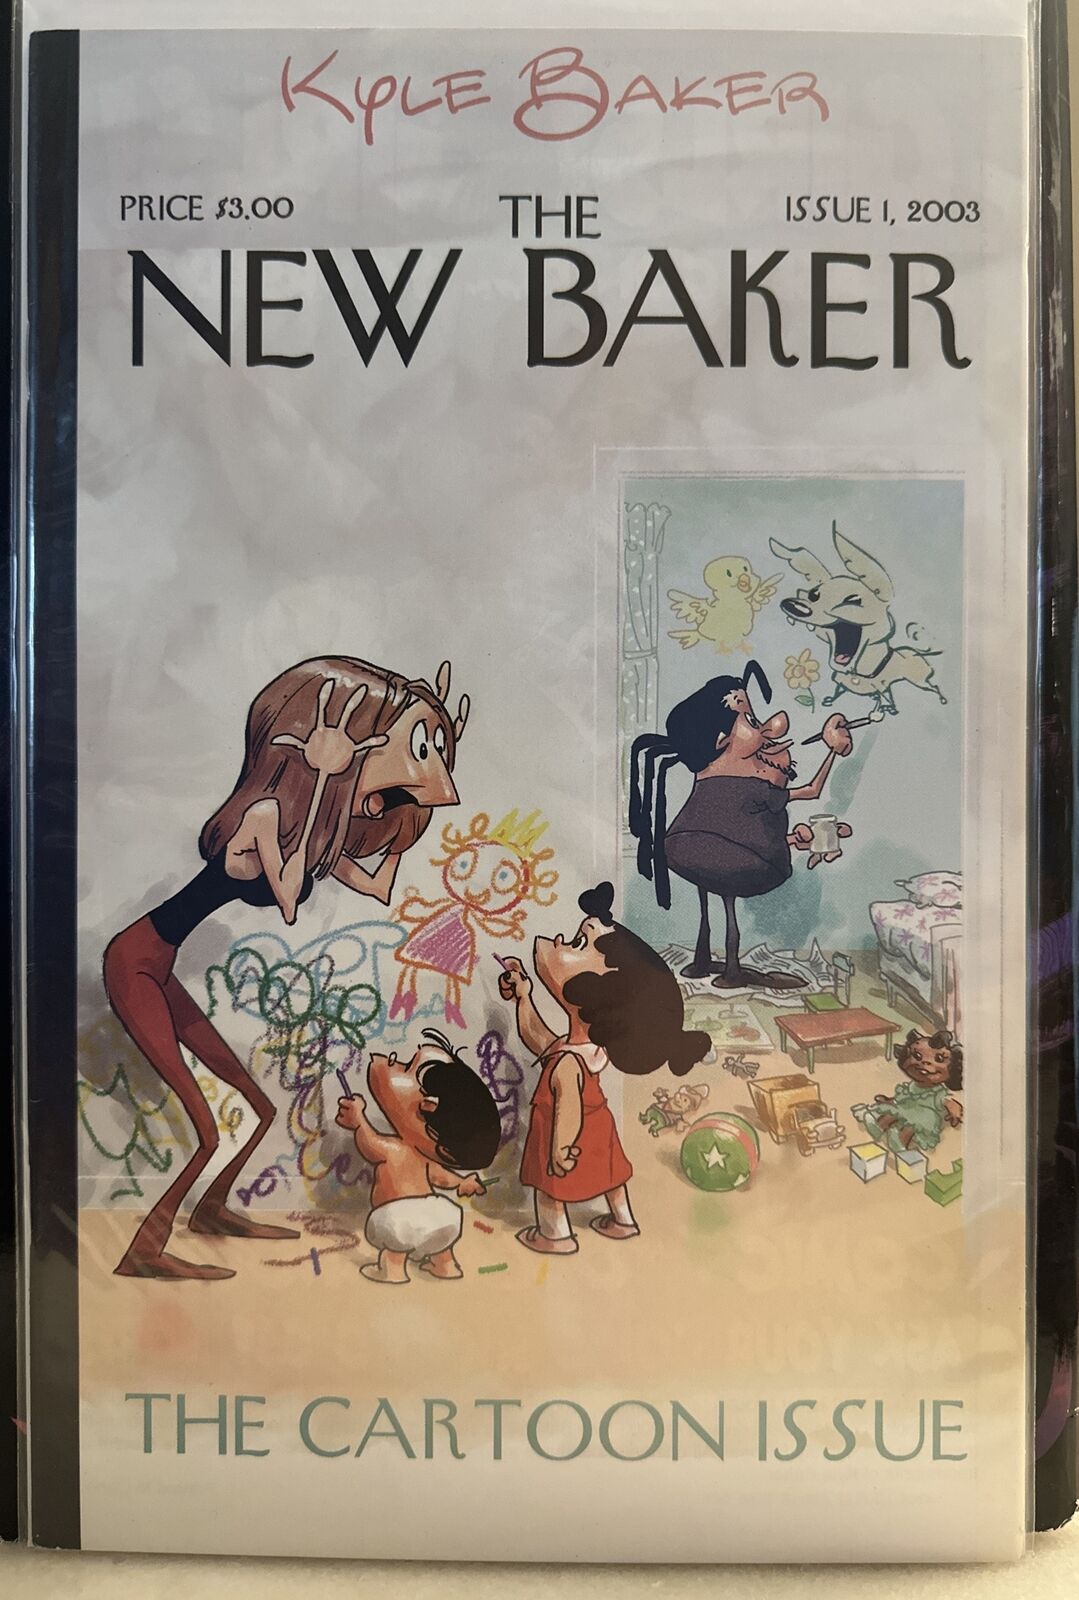 The New Baker #1 The Cartoon Issue 2003 First Printing Kyle Baker